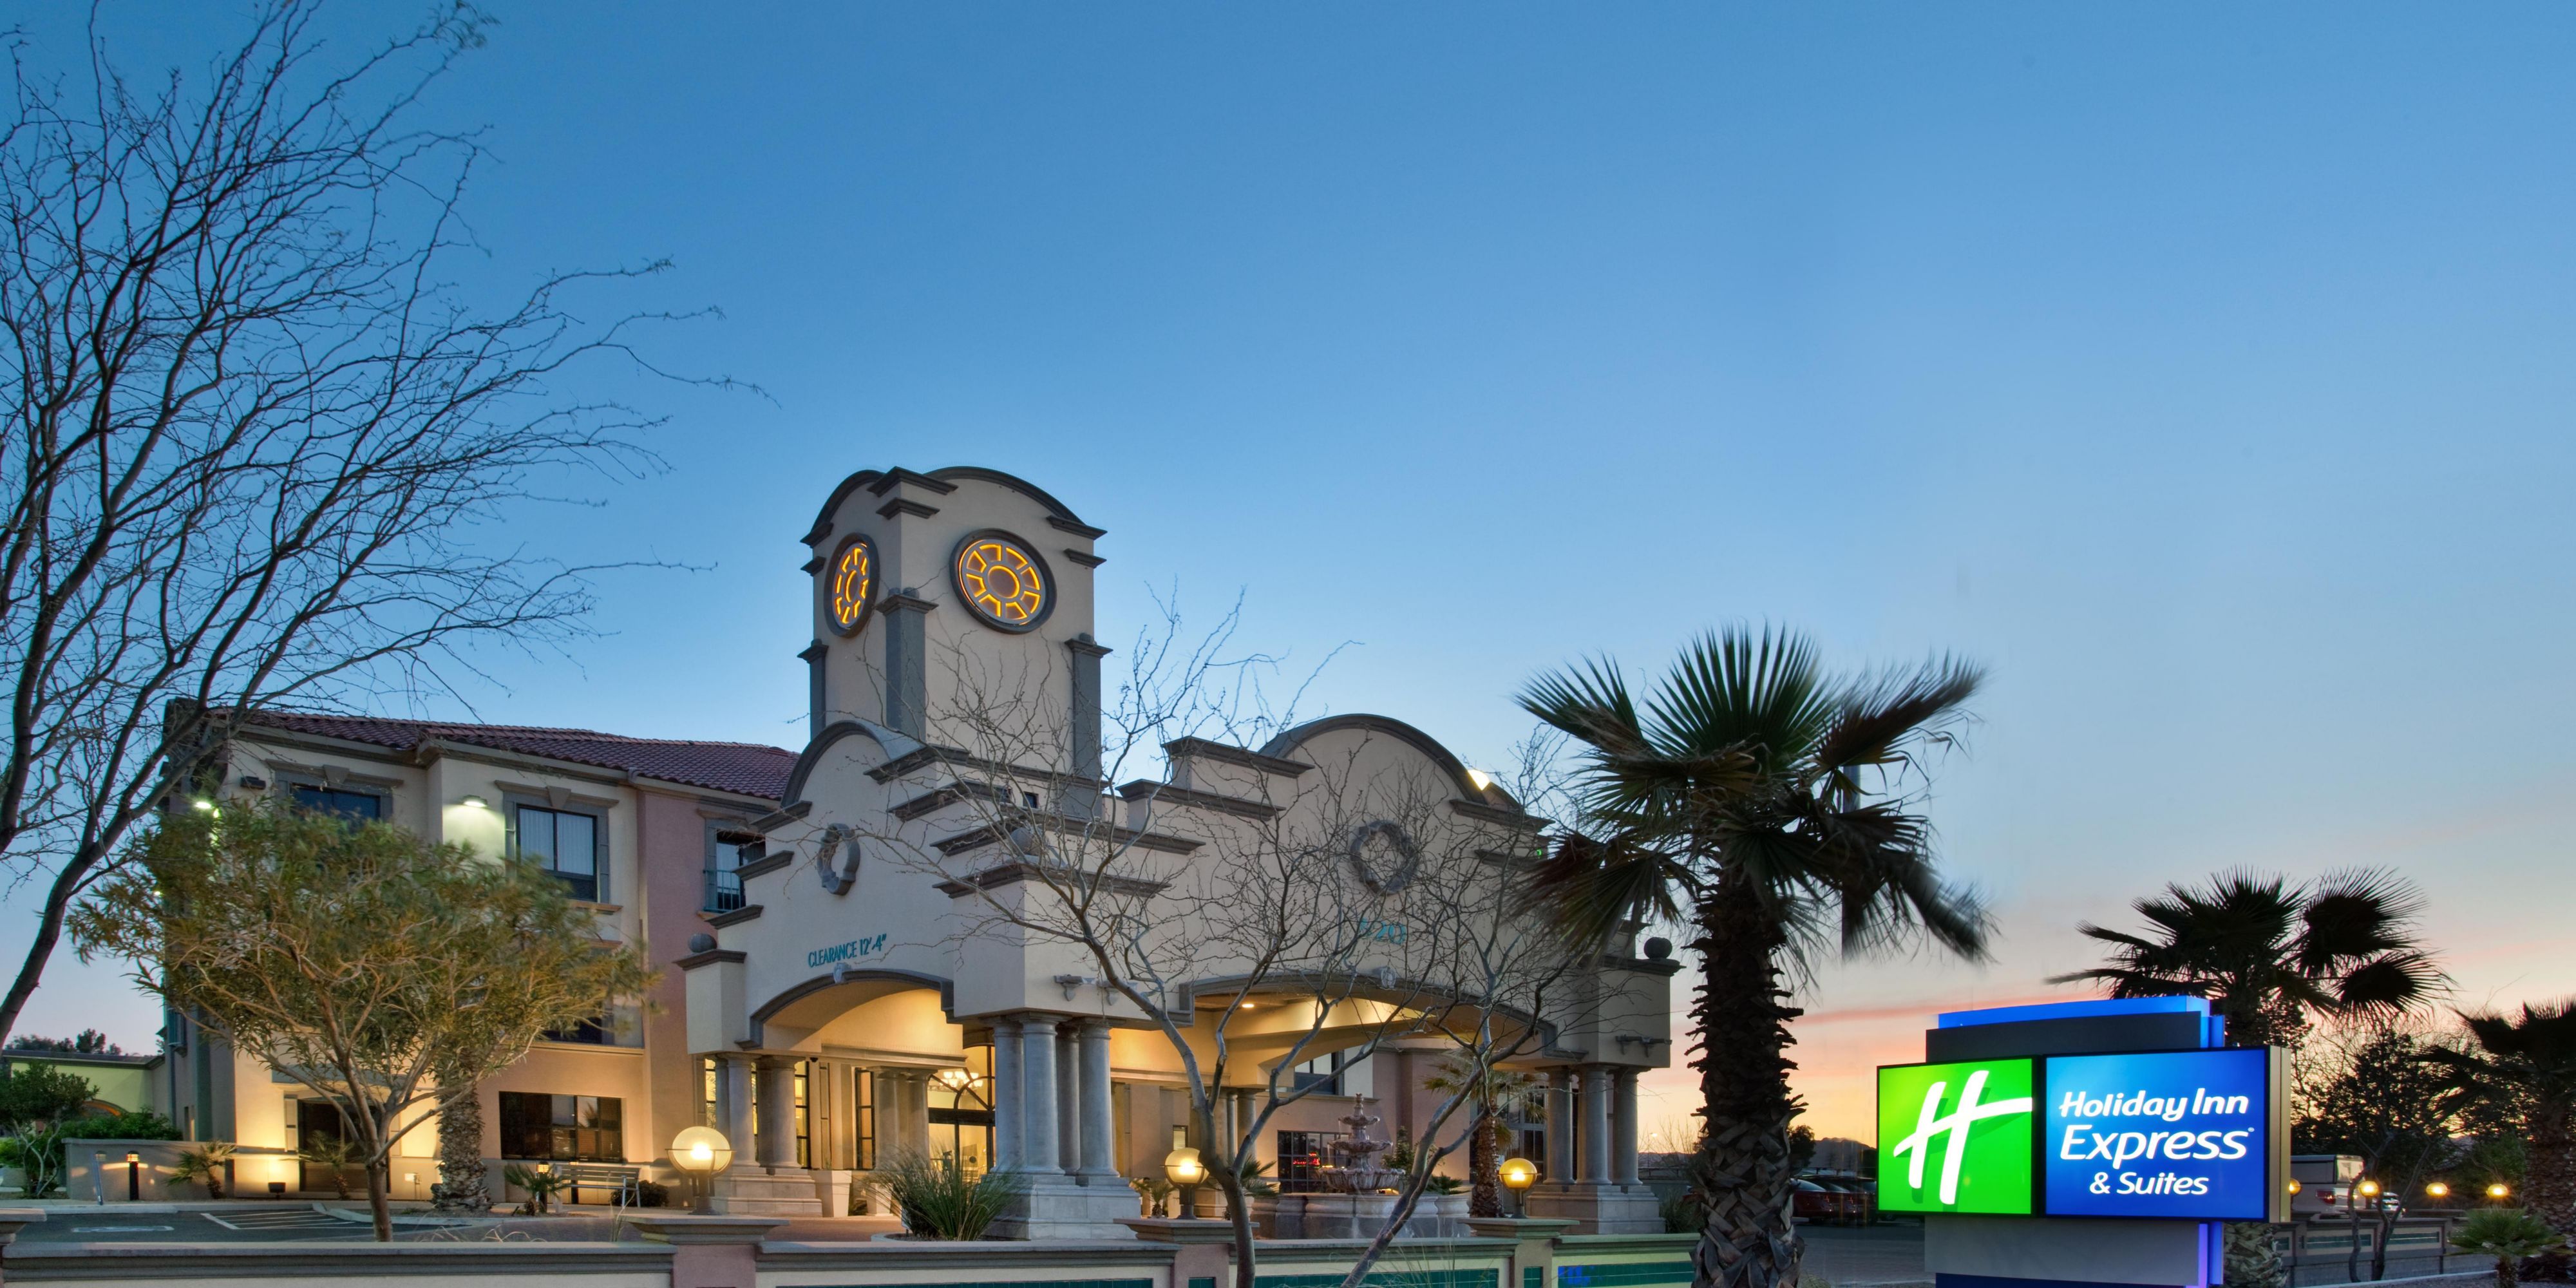 Hotel is within walking distance to the Tuscon Mall, popular restaurants, family friendly activities and parks. 